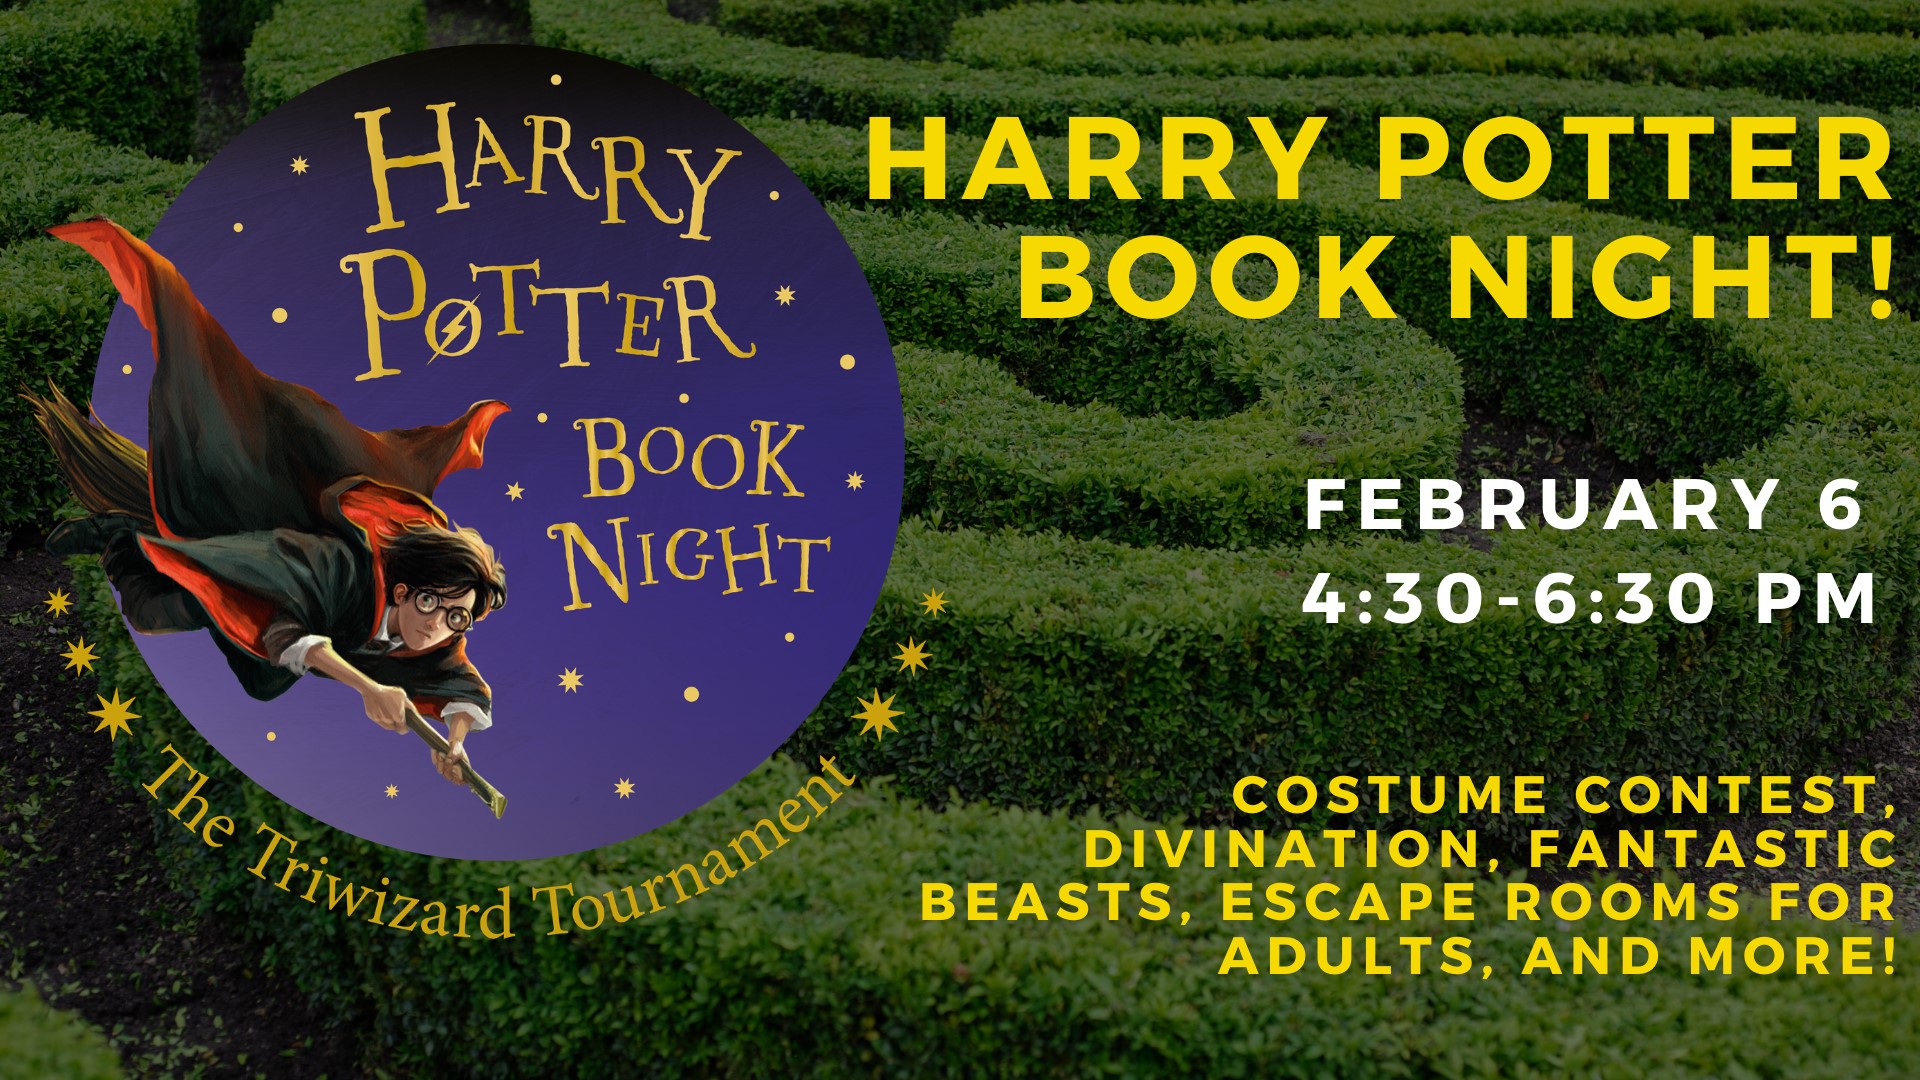 Harry Potter Book Night at HopkinsvilleChristian County Public Library